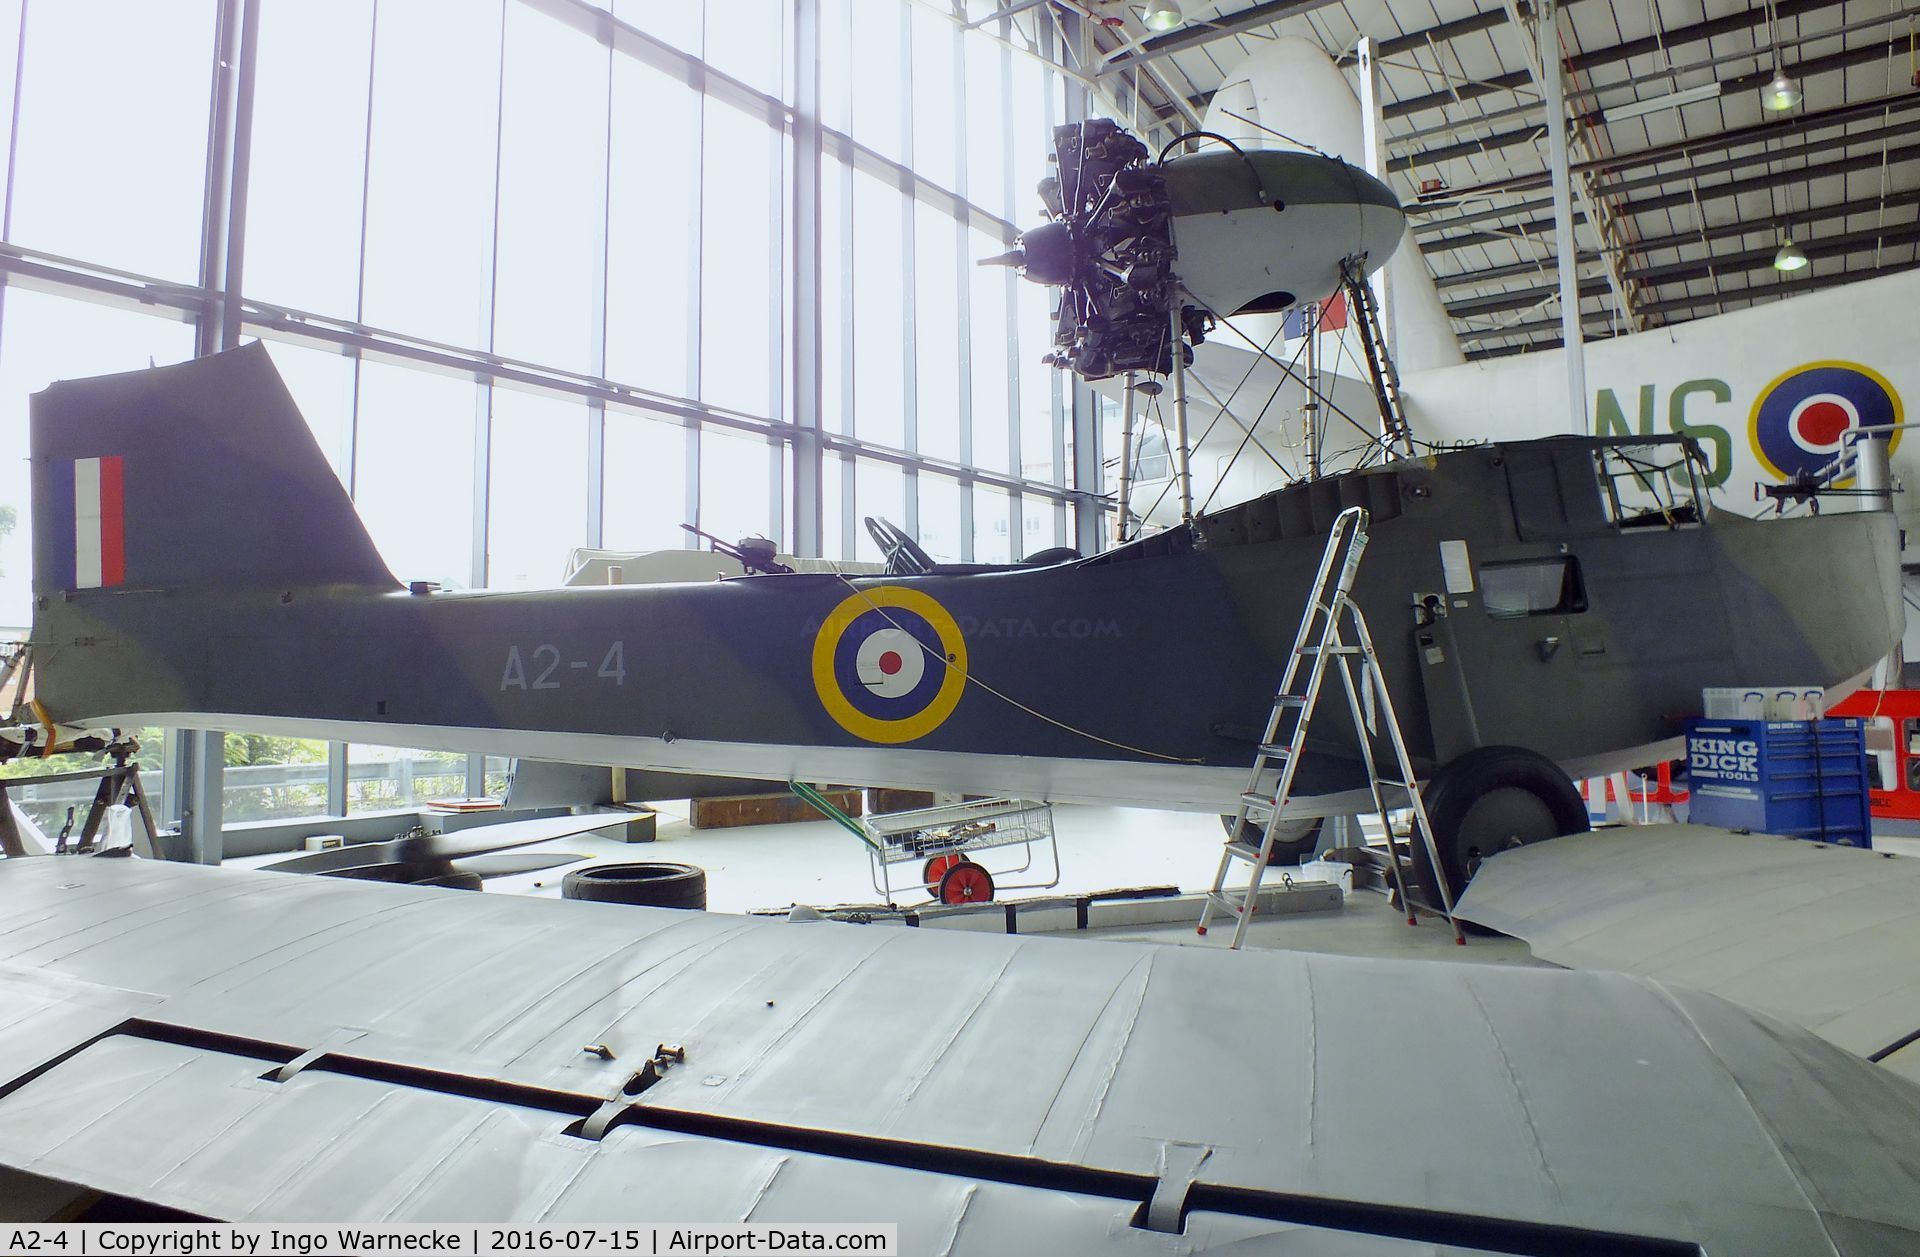 A2-4, Supermarine Seagull V C/N Not found A2-4/VH-ALB, Supermarine Seagull V (getting dismantled for removal from the Battle of Britain Hall) at the RAF-Museum, Hendon